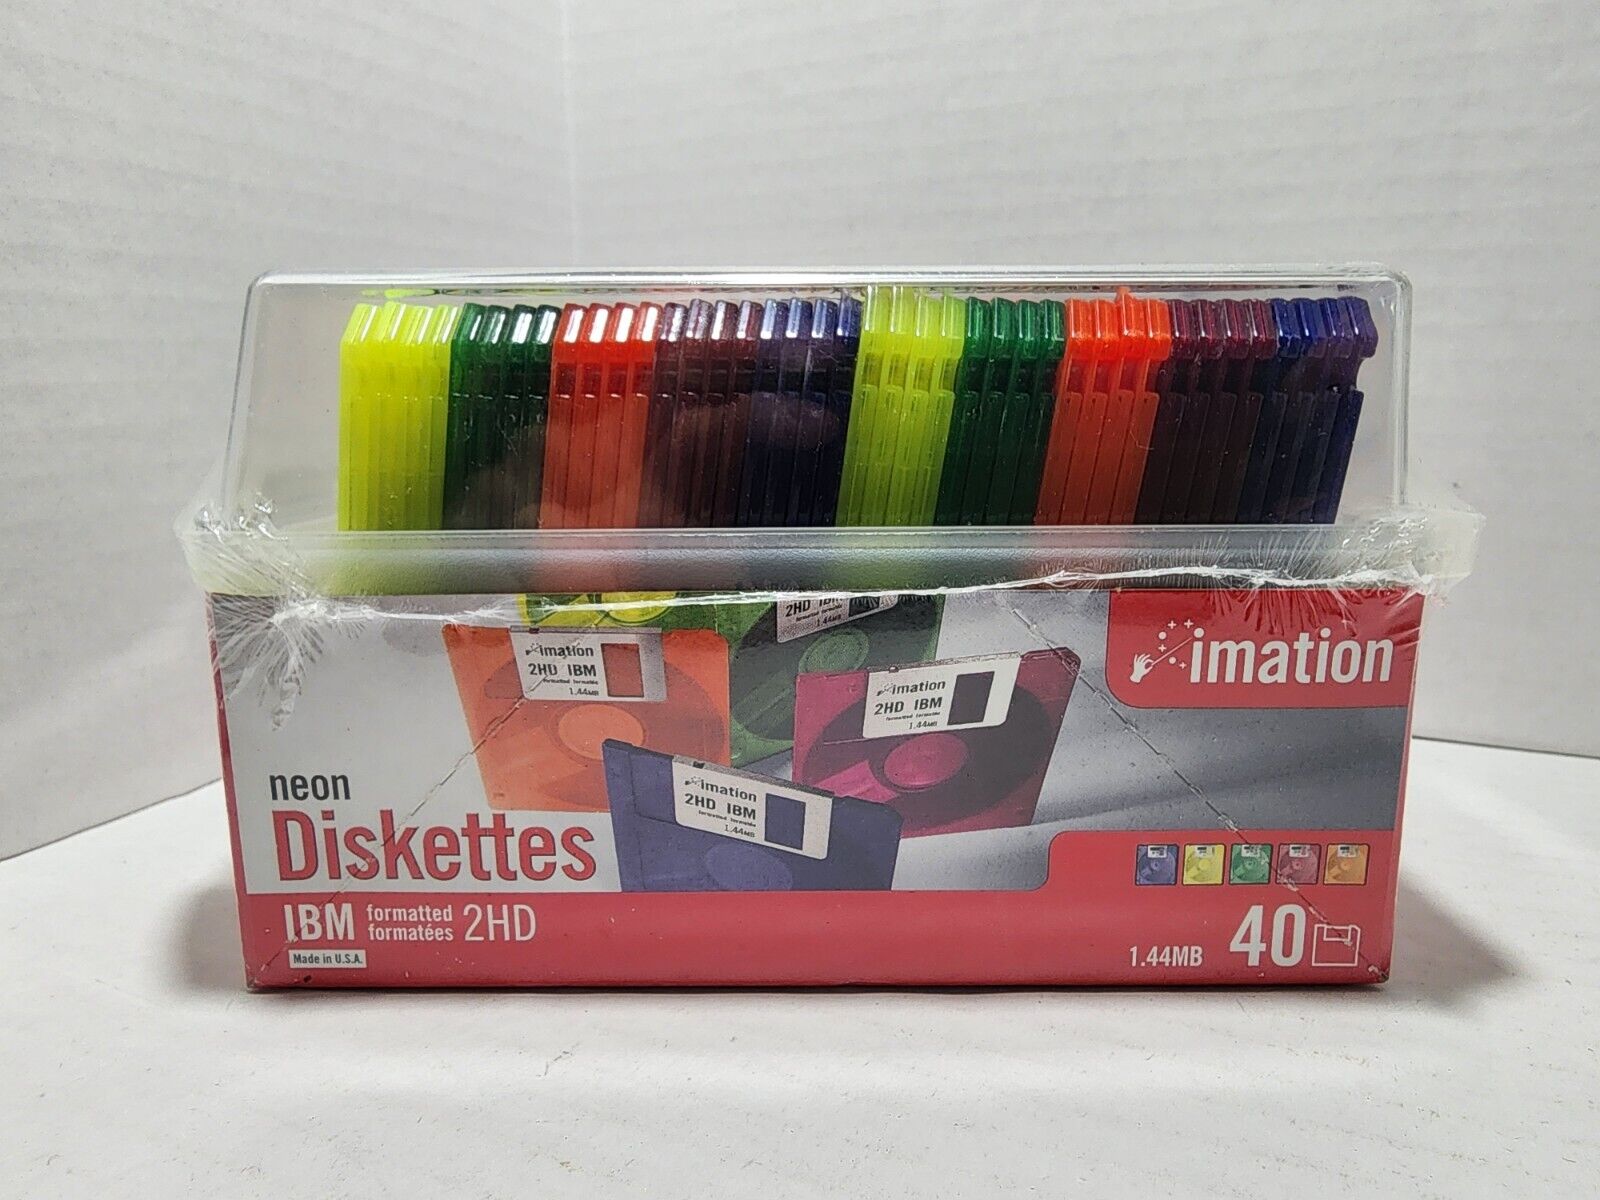 IMATION Neon Diskettes 40-Pack IBM 2HD 3.5